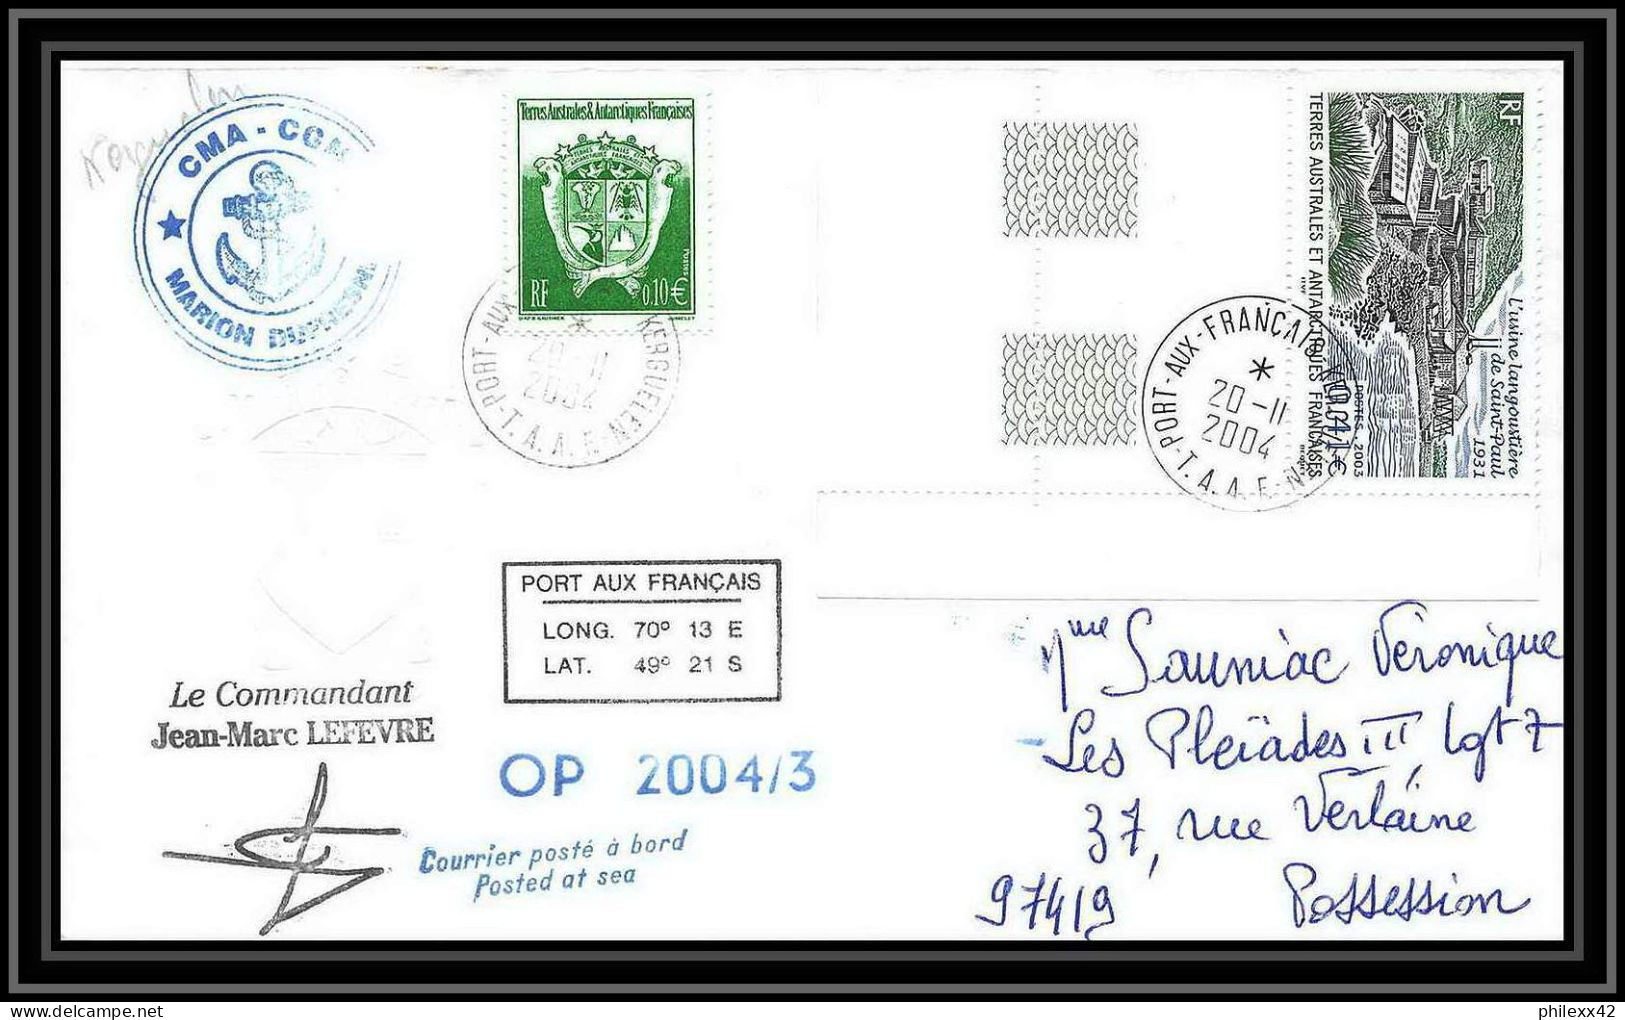 2472 ANTARCTIC Terres Australes TAAF Lettre Cover Dufresne 2 Signé Signed OP 2004/3 20/11/2004 N°349 Helilagon - Helicopters